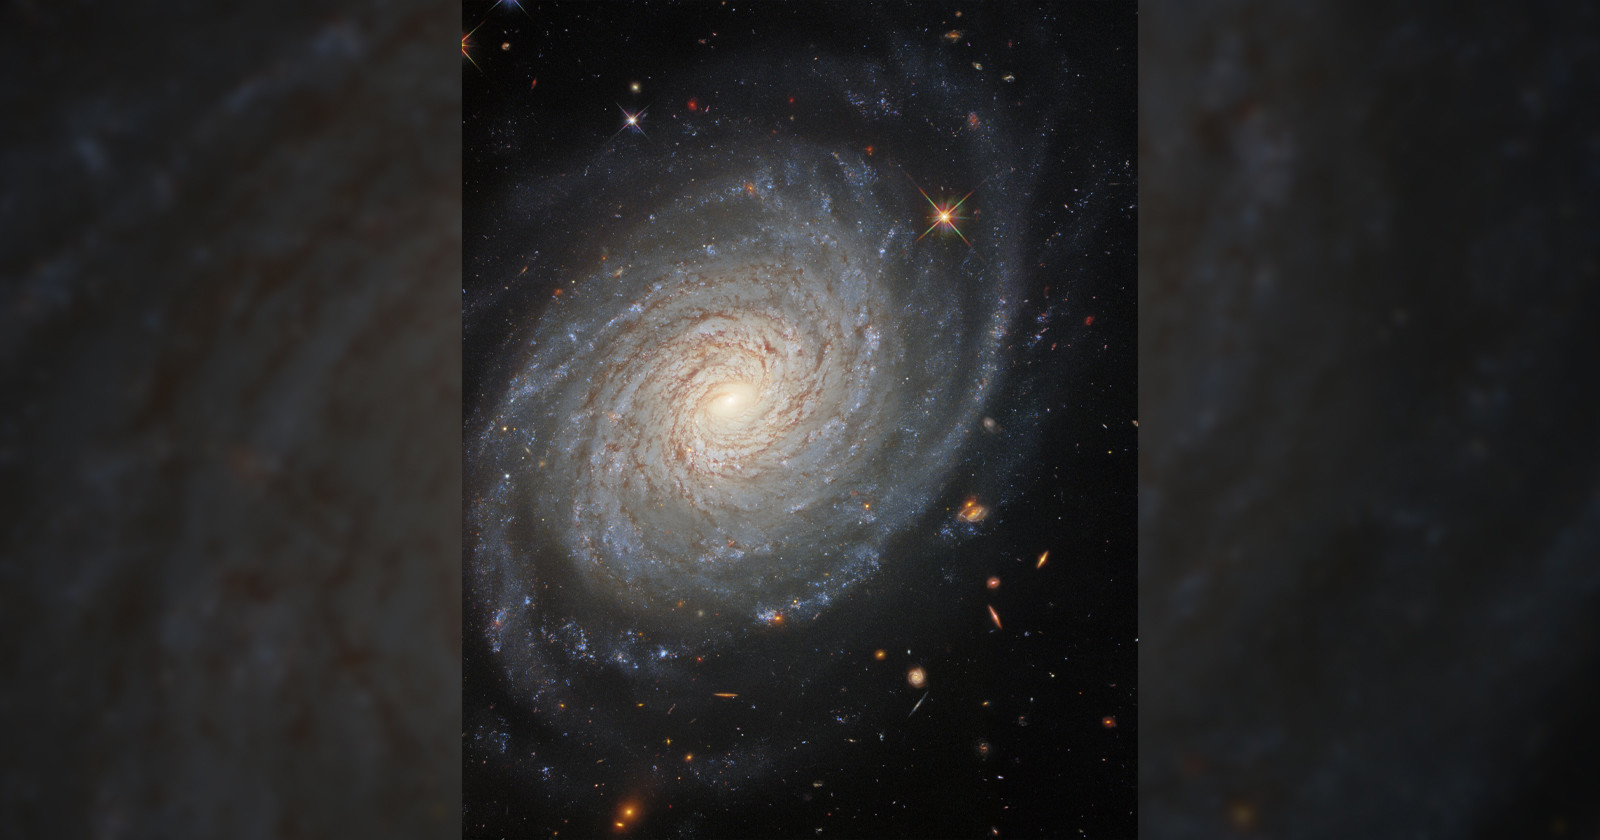 Hubble Captures Majestic Photo of a Galaxy with an Explosive Past